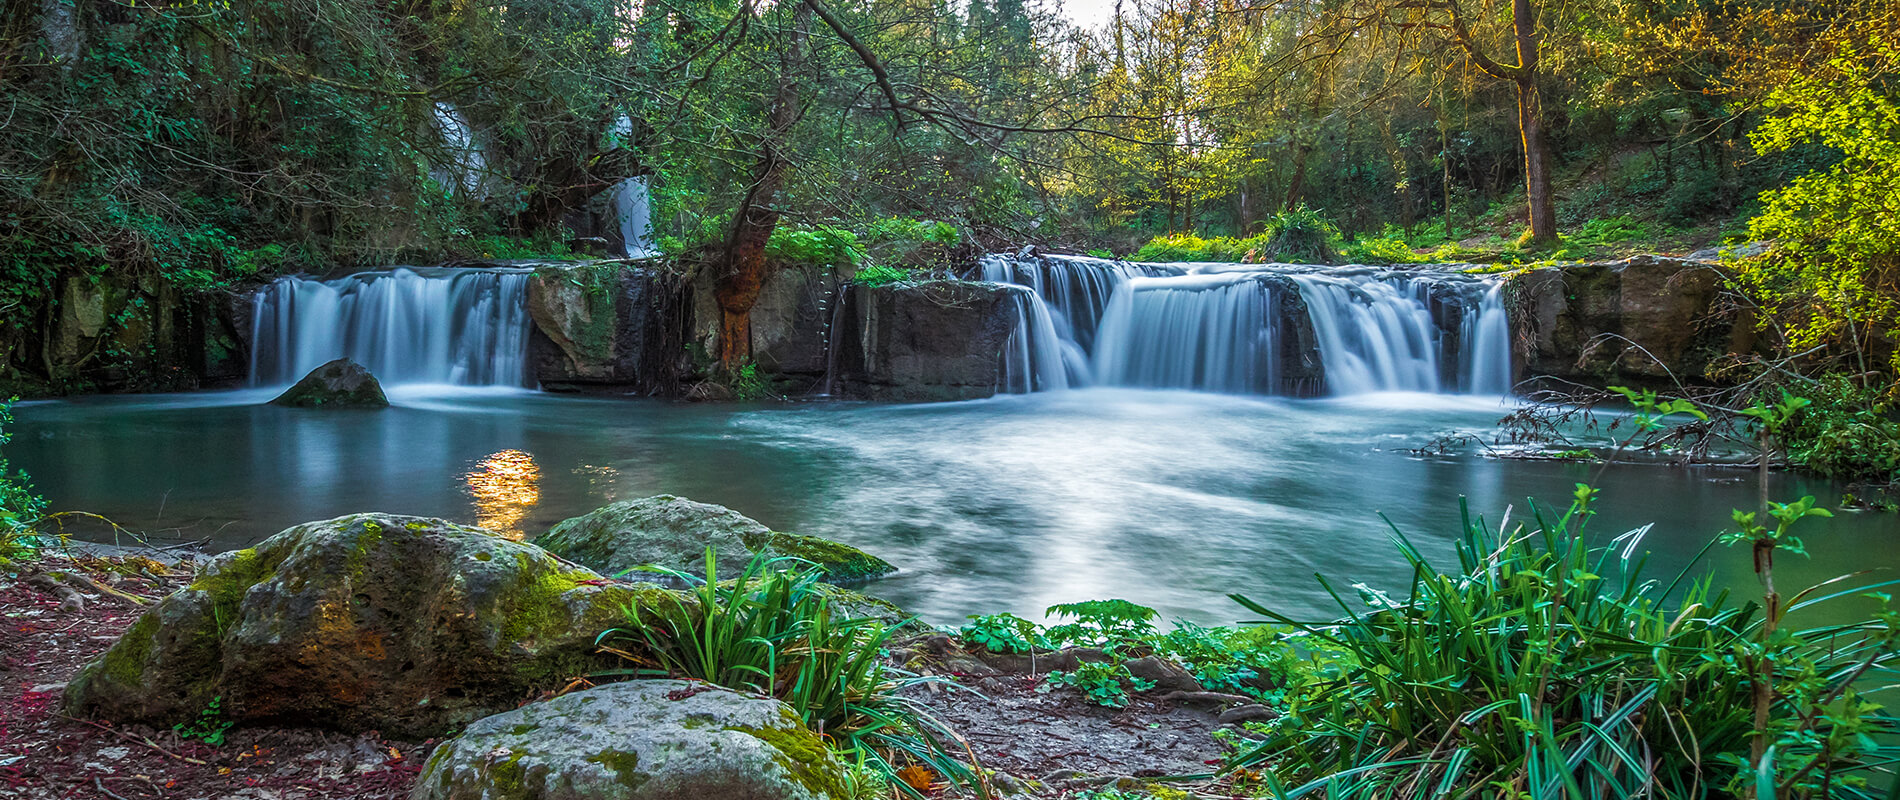 The Monte Gelato waterfalls, a natural beauty of Tuscia